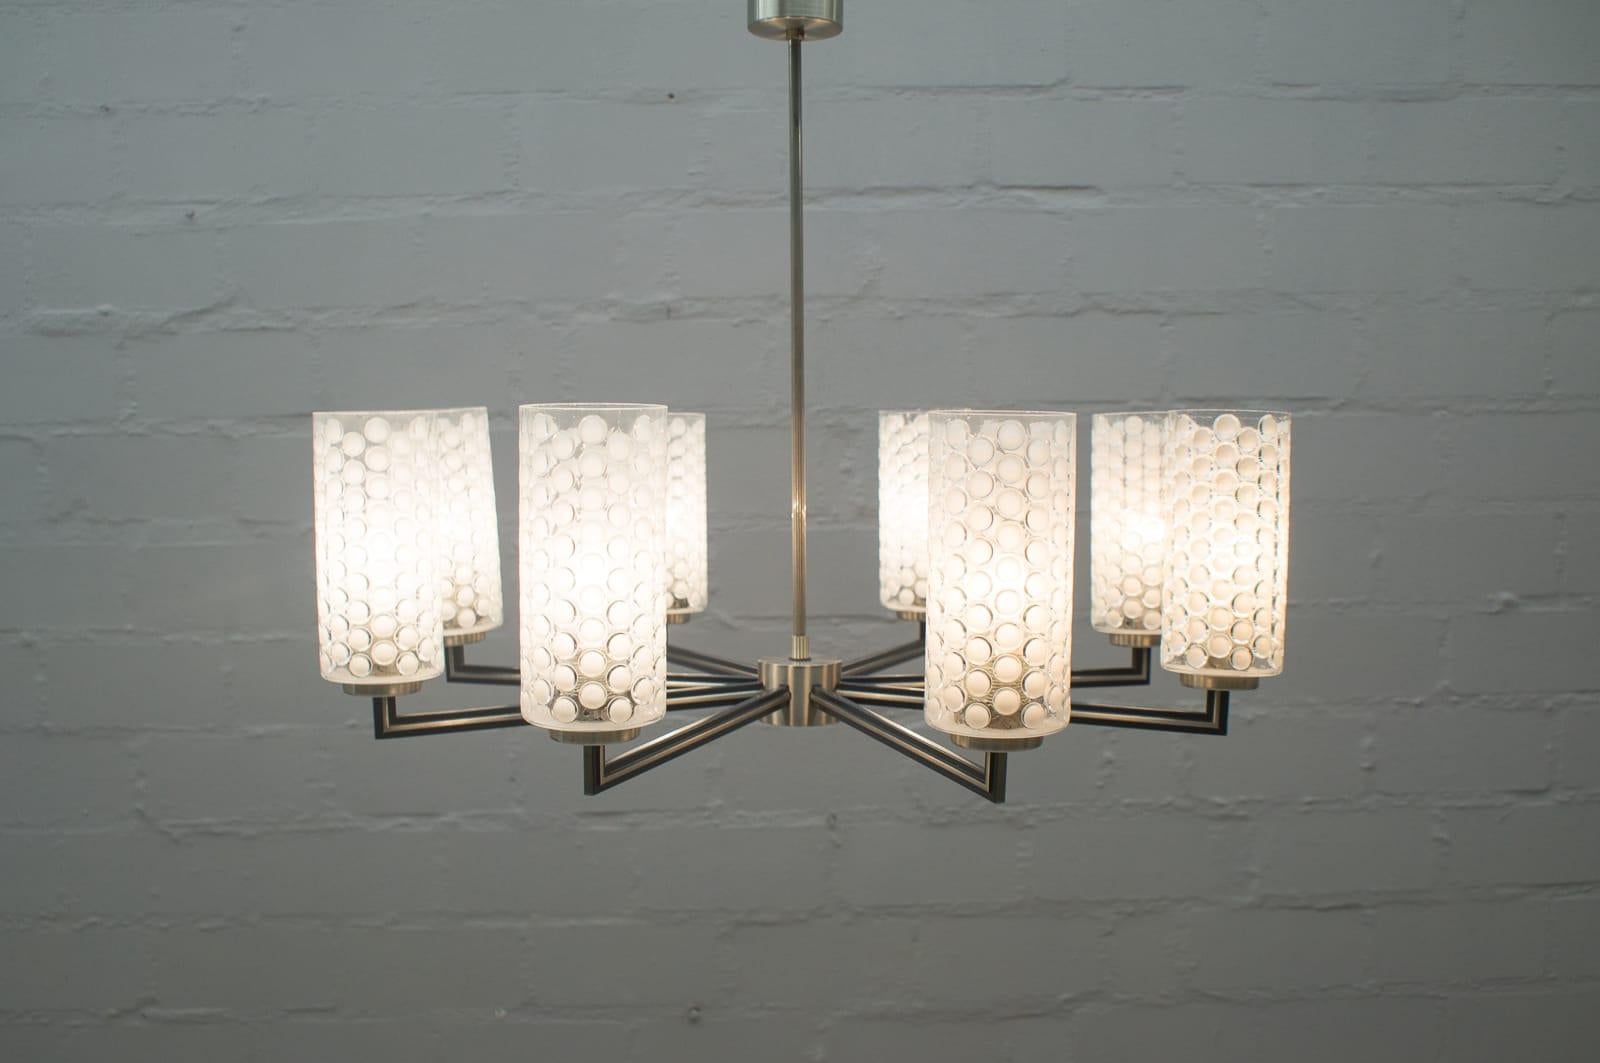 Rare Ceiling Lamp with 8 Bubbled Glass Shades, Kaiser Leuchten Germany, 1960s In Good Condition For Sale In Nürnberg, Bayern